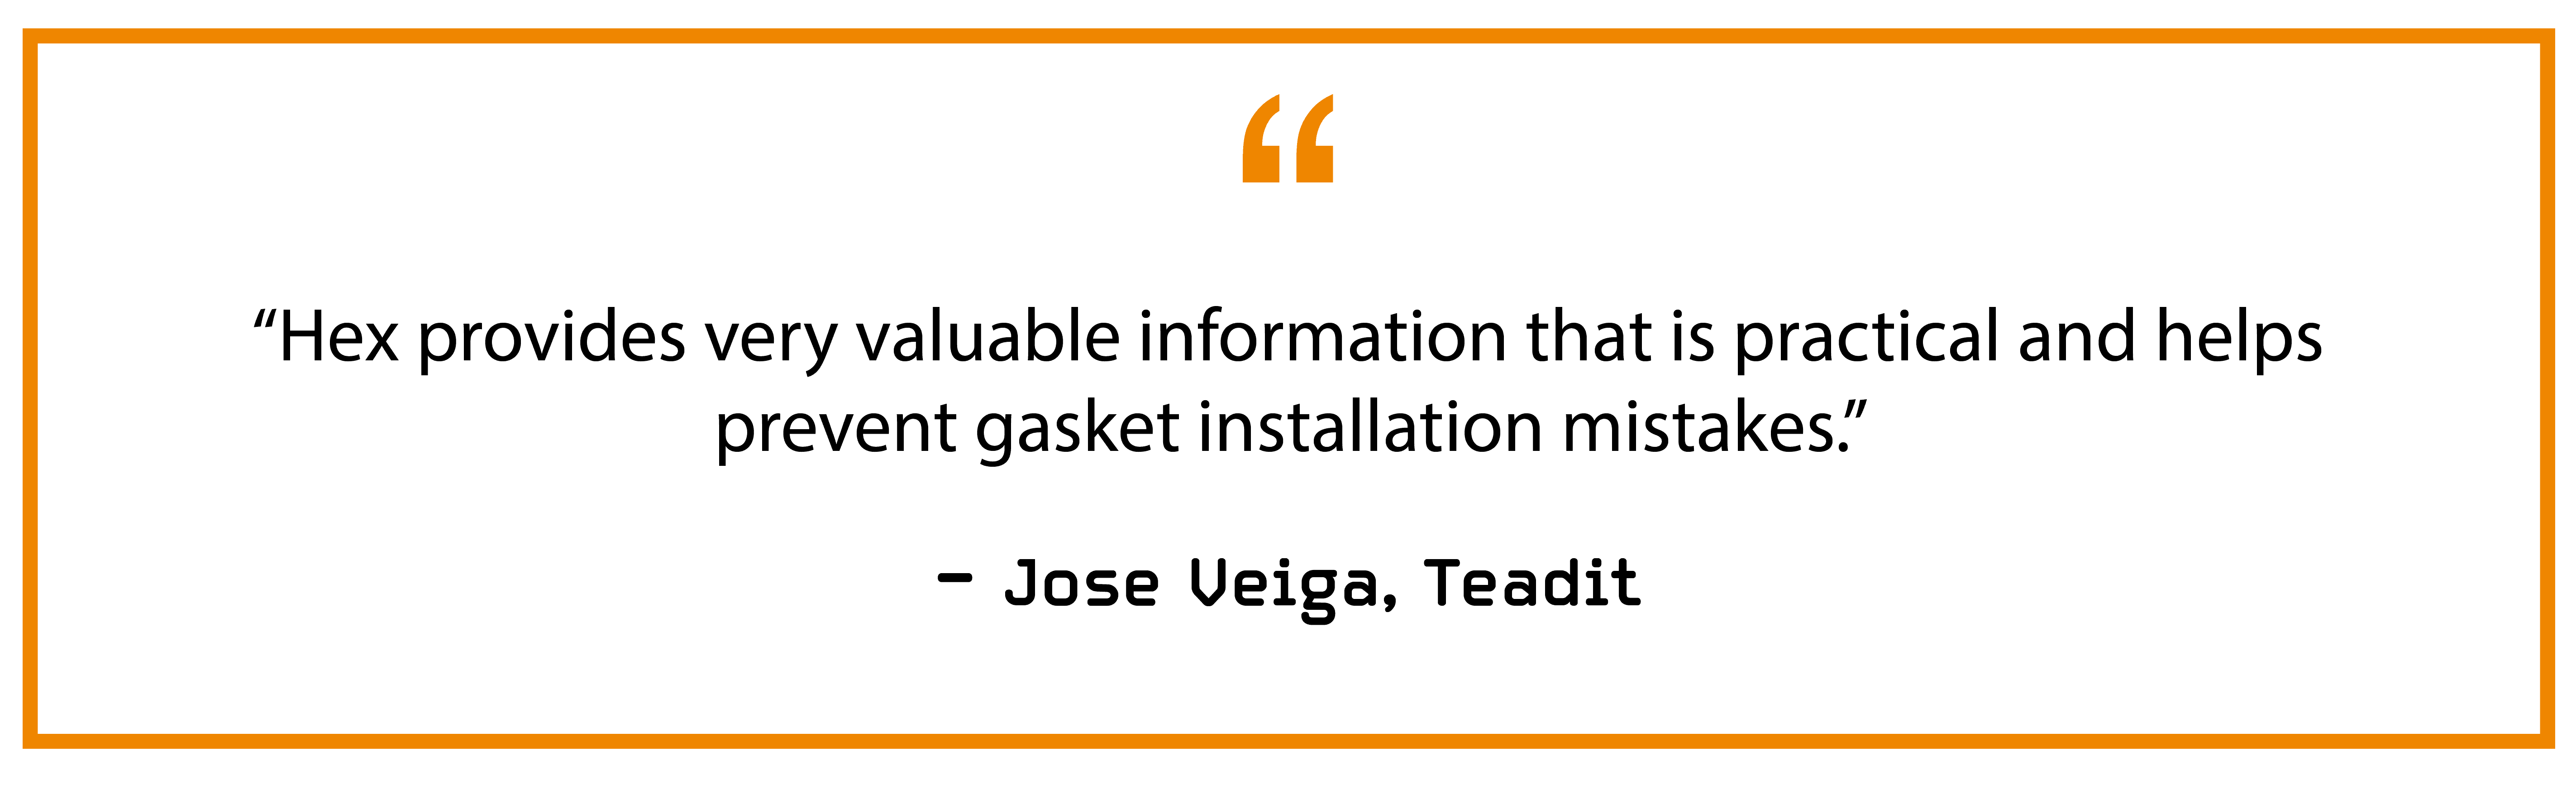 “Hex provides very valuable information that is practical and helps prevent gasket installation mistakes.” — Jose Veiga, Teadit